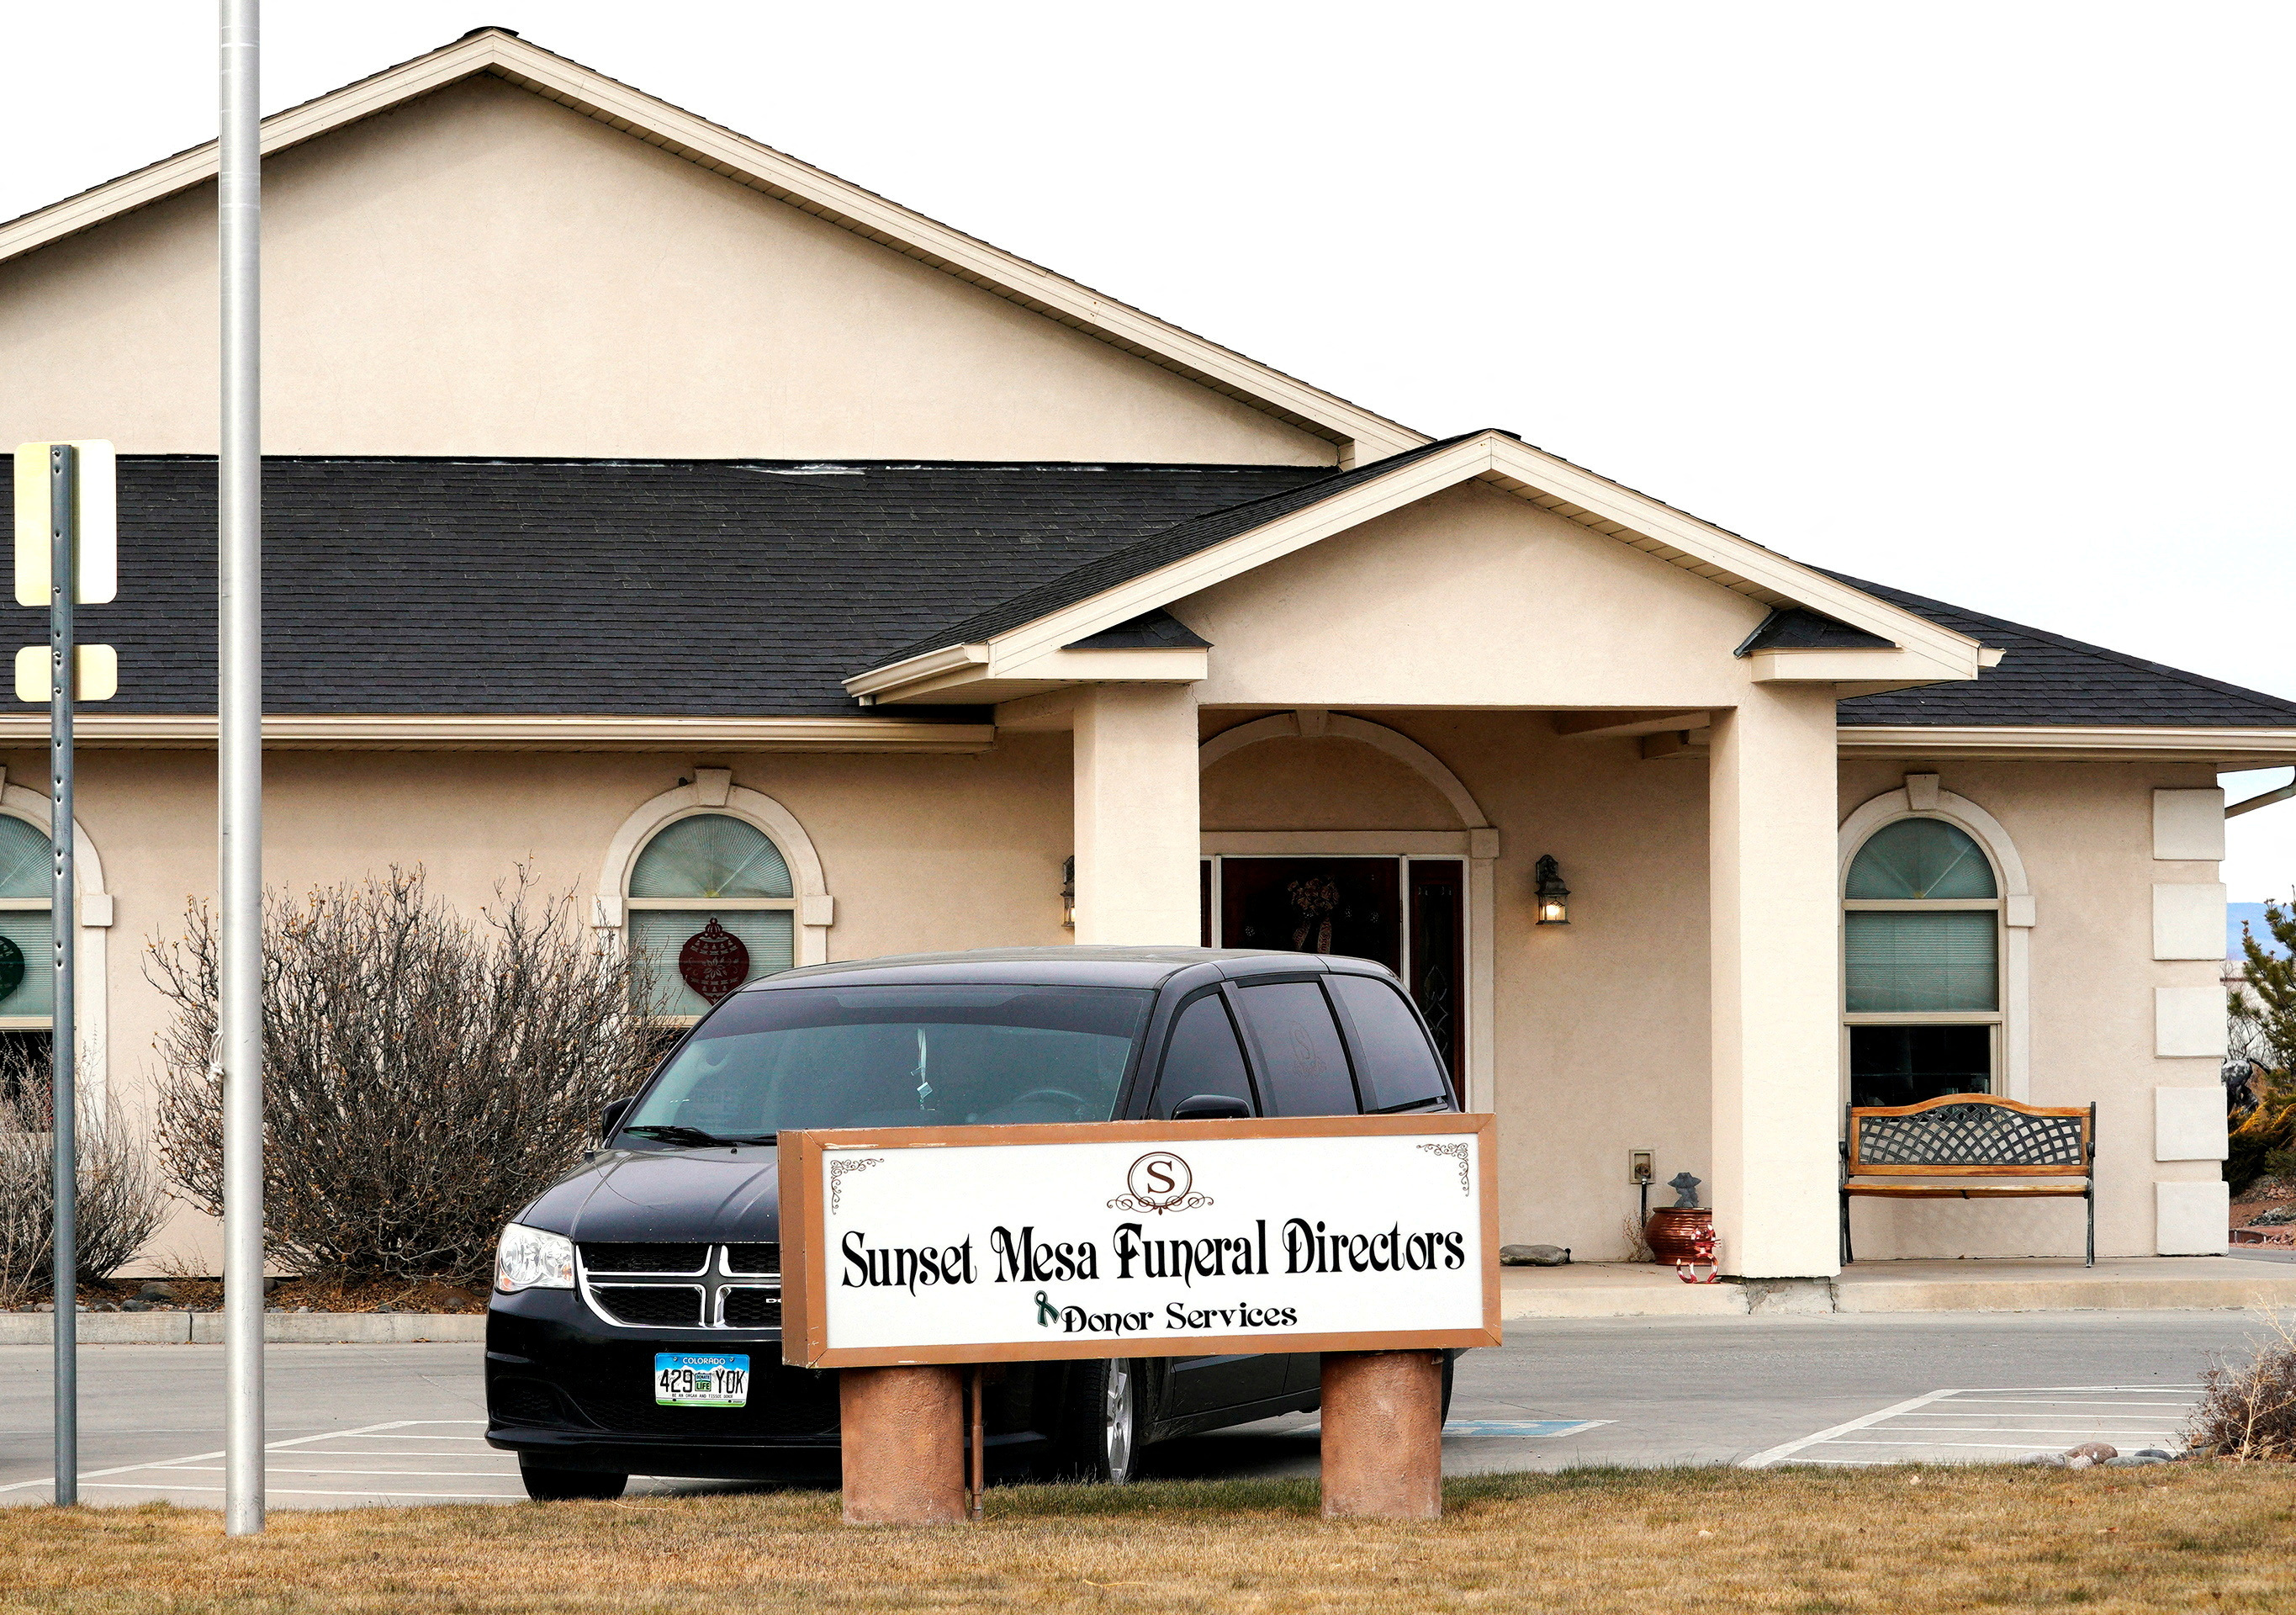 FILE PHOTO: The Sunset Mesa Funeral Directors and Donor Services building in Montrose, Colorado, US, December 16, 2017. REUTERS/Rick Wilking/File Photo/File Photo